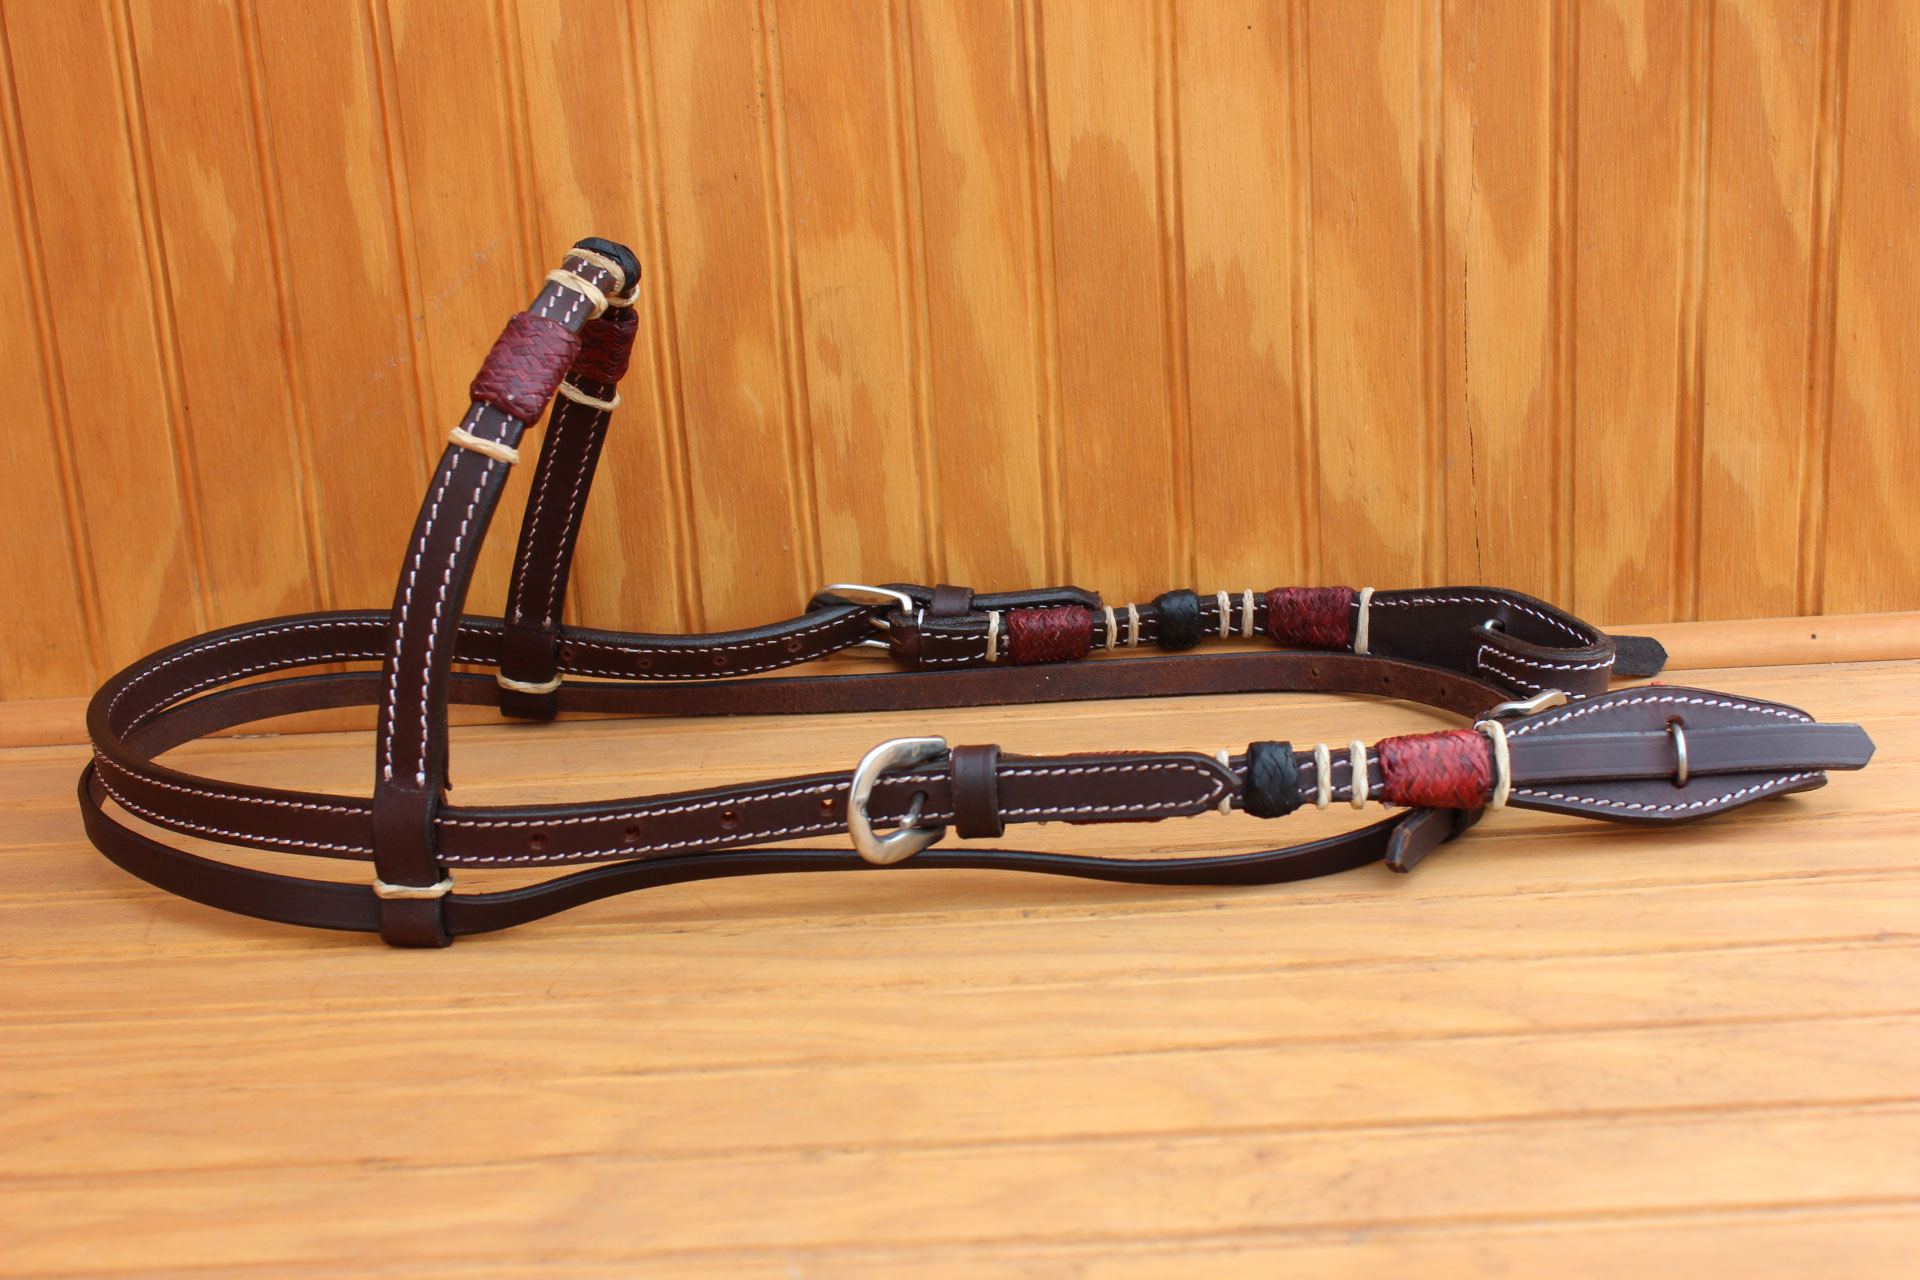 Rancher Rawhide- One Ear Leather Headstall - Ranch Hand Store